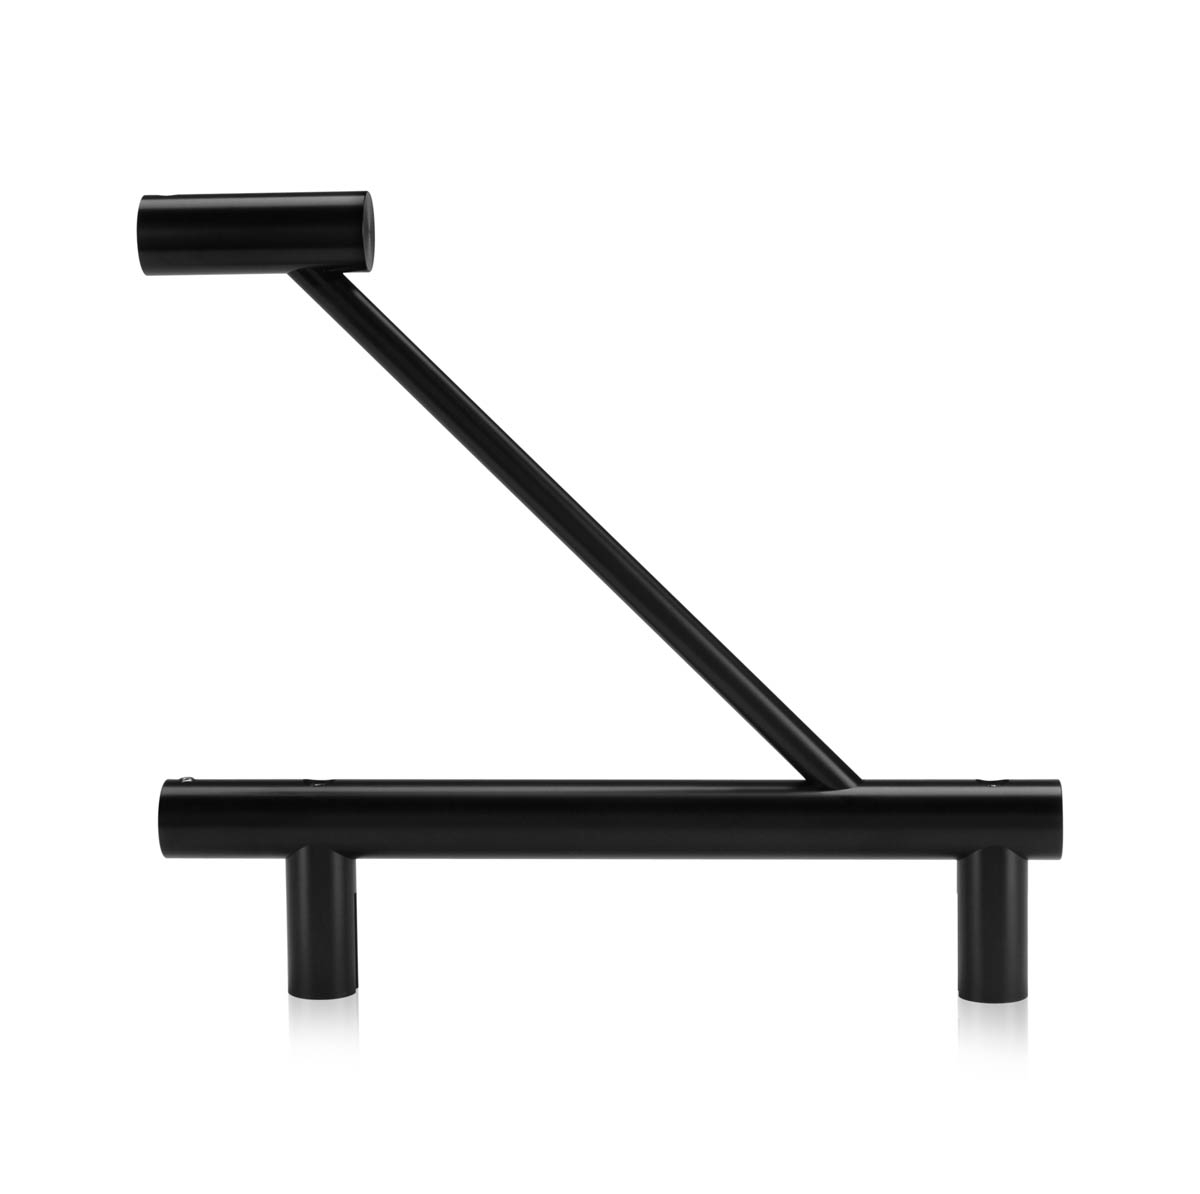 Aluminum Flag Sign Bracket Only, Matte Black Anodized Finish. 5/16'' Thickness Material Accepted, 7-7/8 Length, 3/4'' Diameter. (Sold Without Panel, Bracket Only)